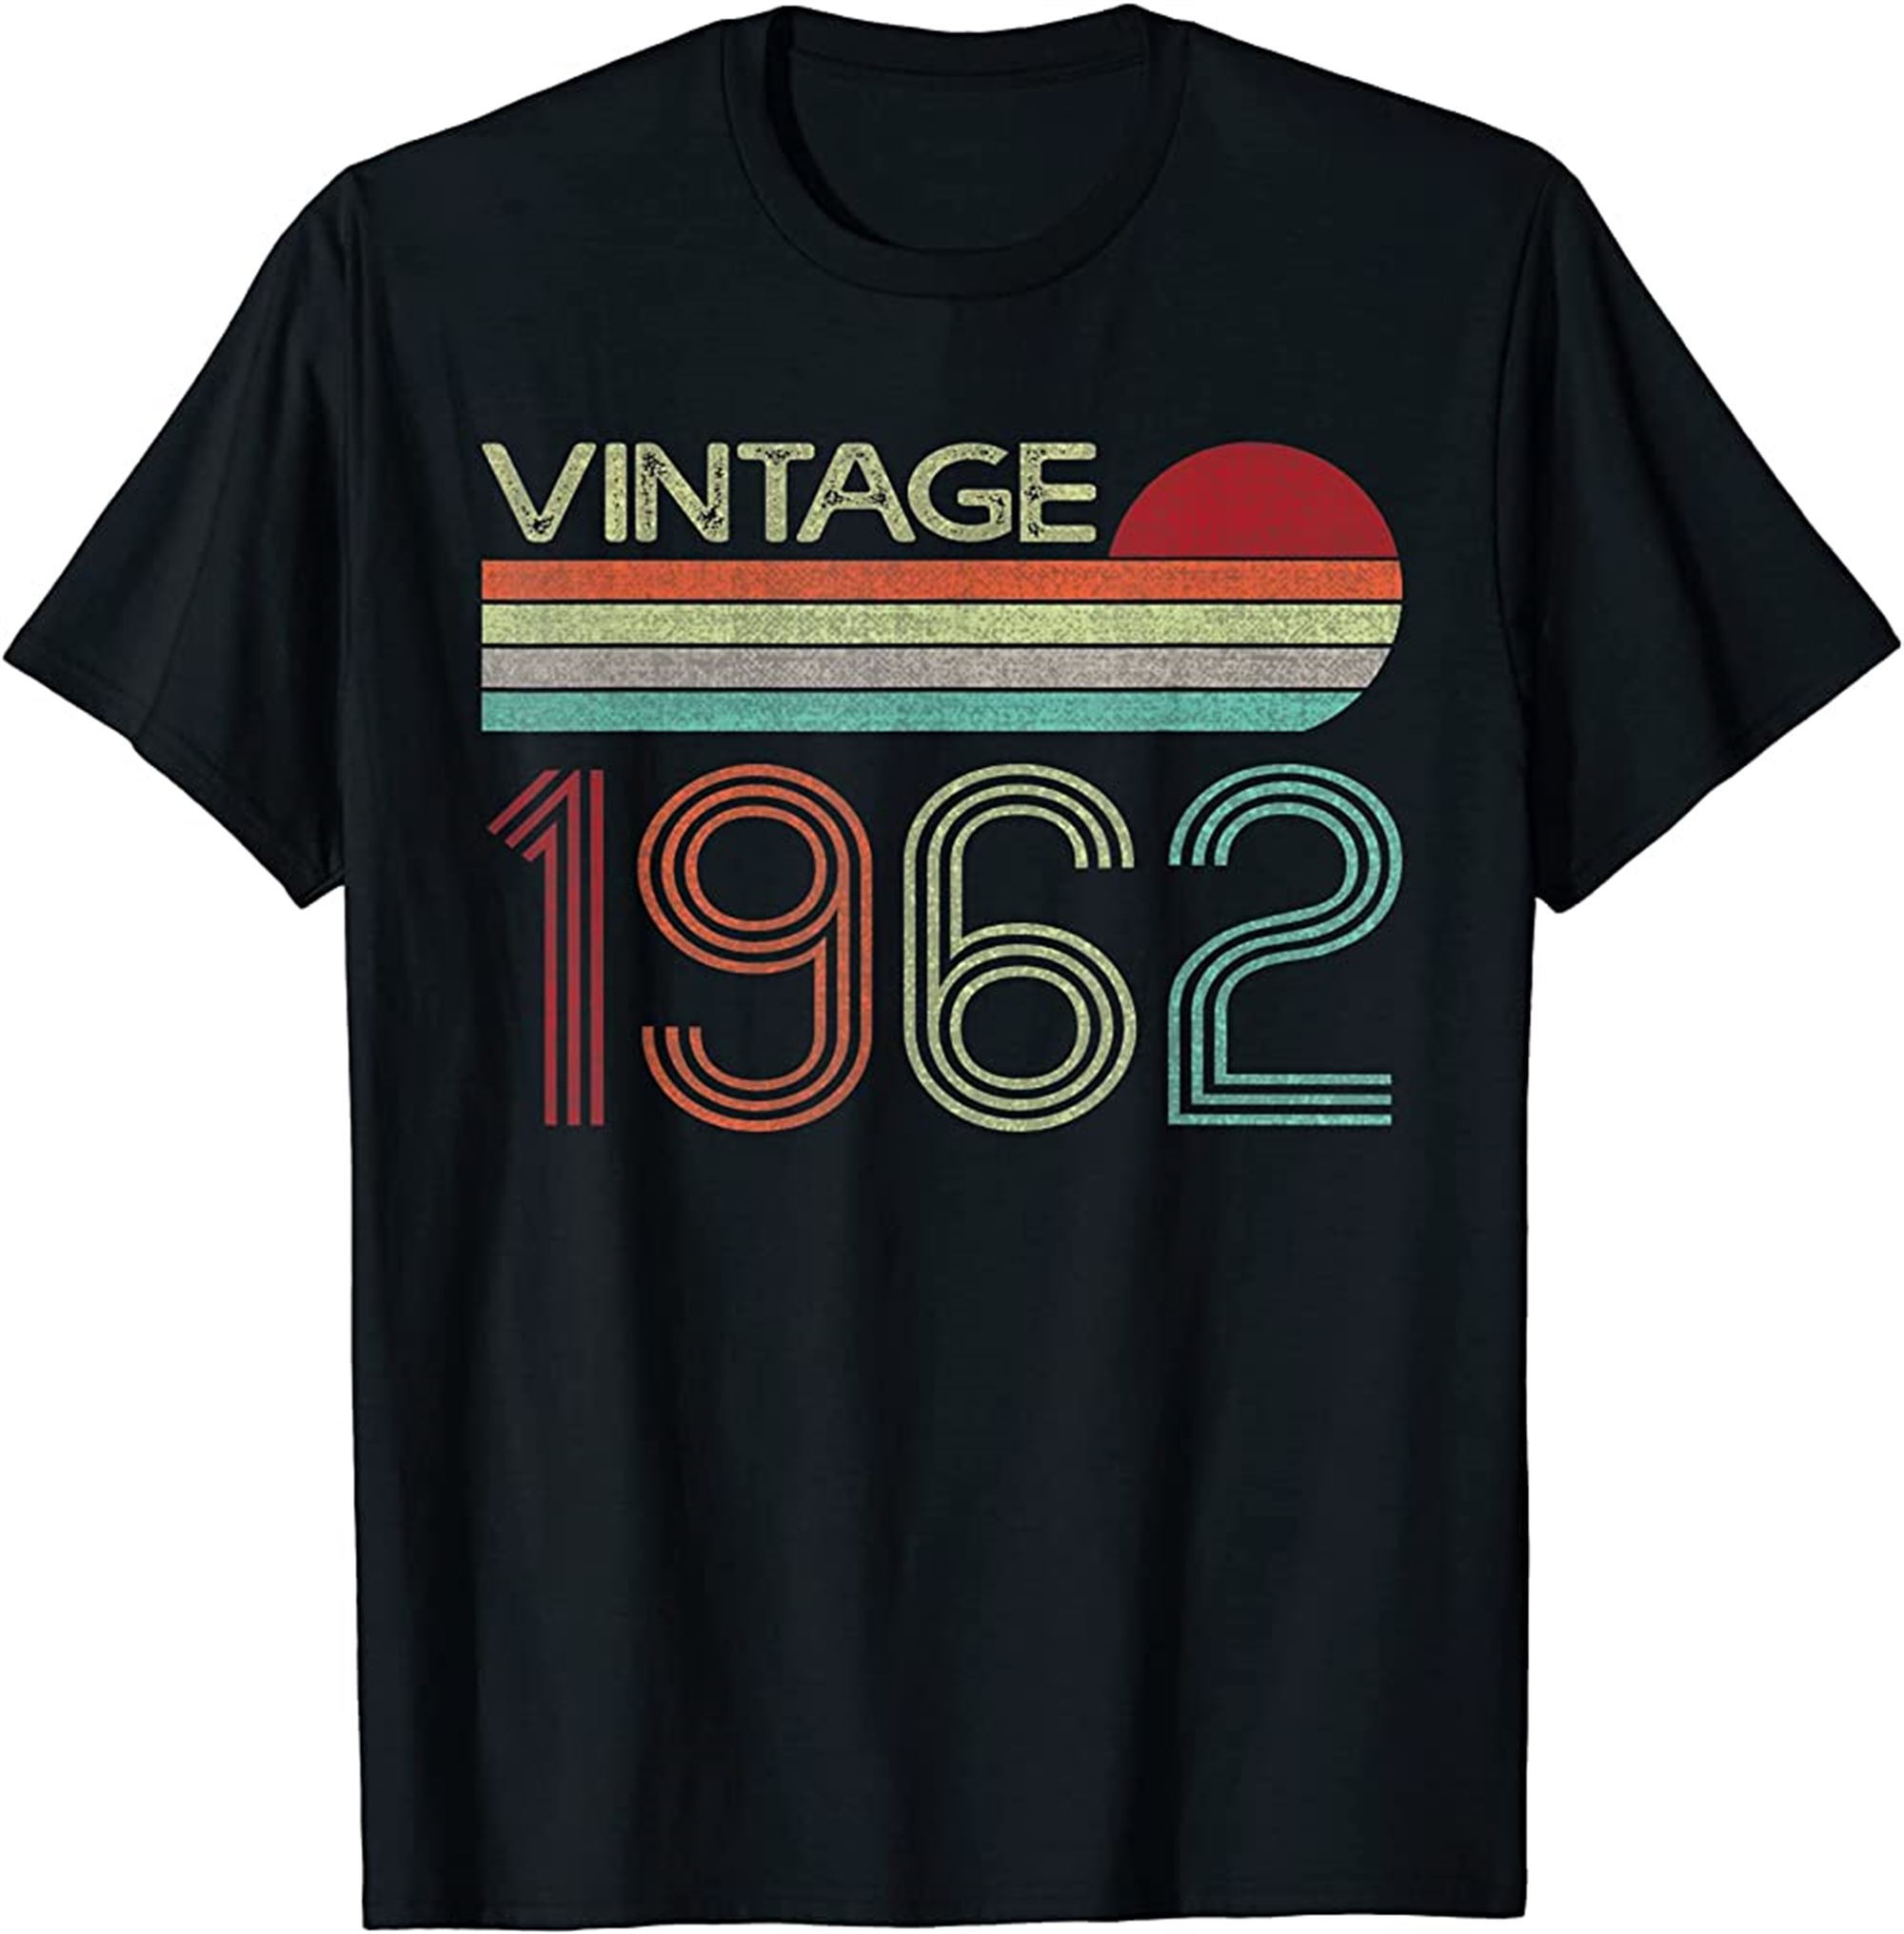 Vintage 1962 60th Birthday Gift Men Women 60 Years Old T-shirt Plus Size Up To 5xl